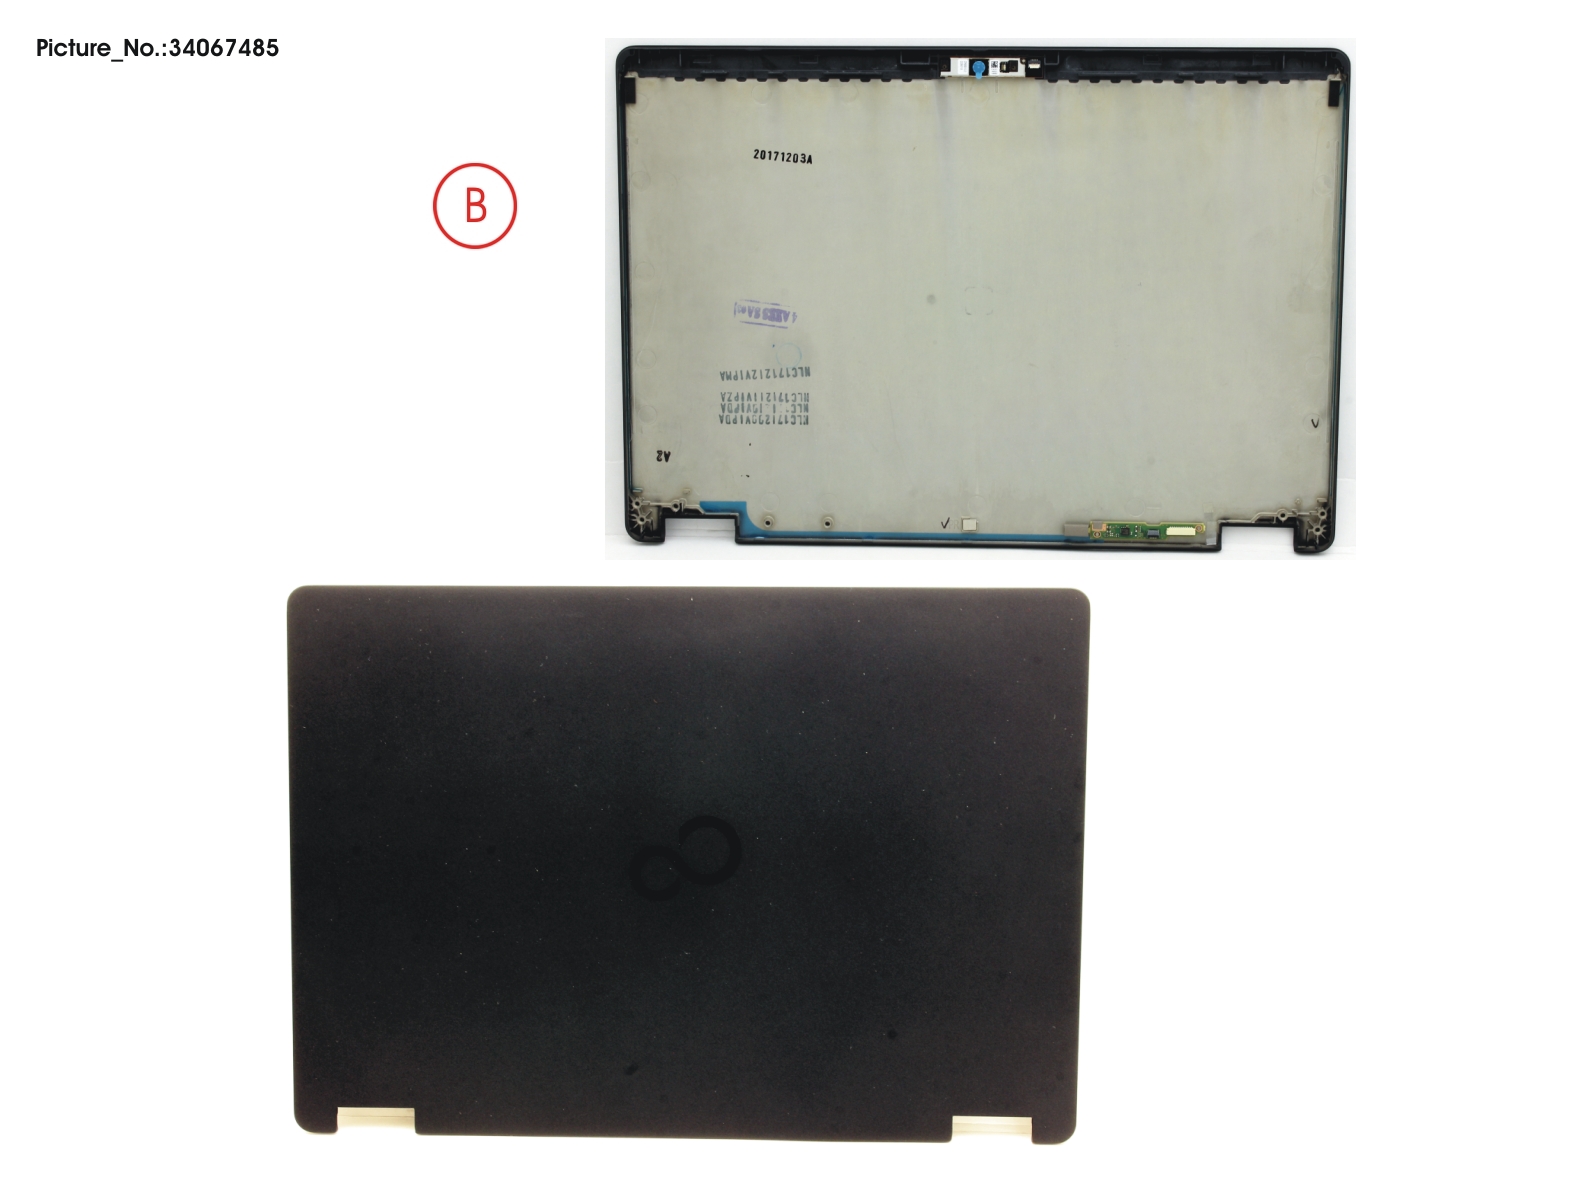 LCD BACK COVER ASSY (FOR FHD)